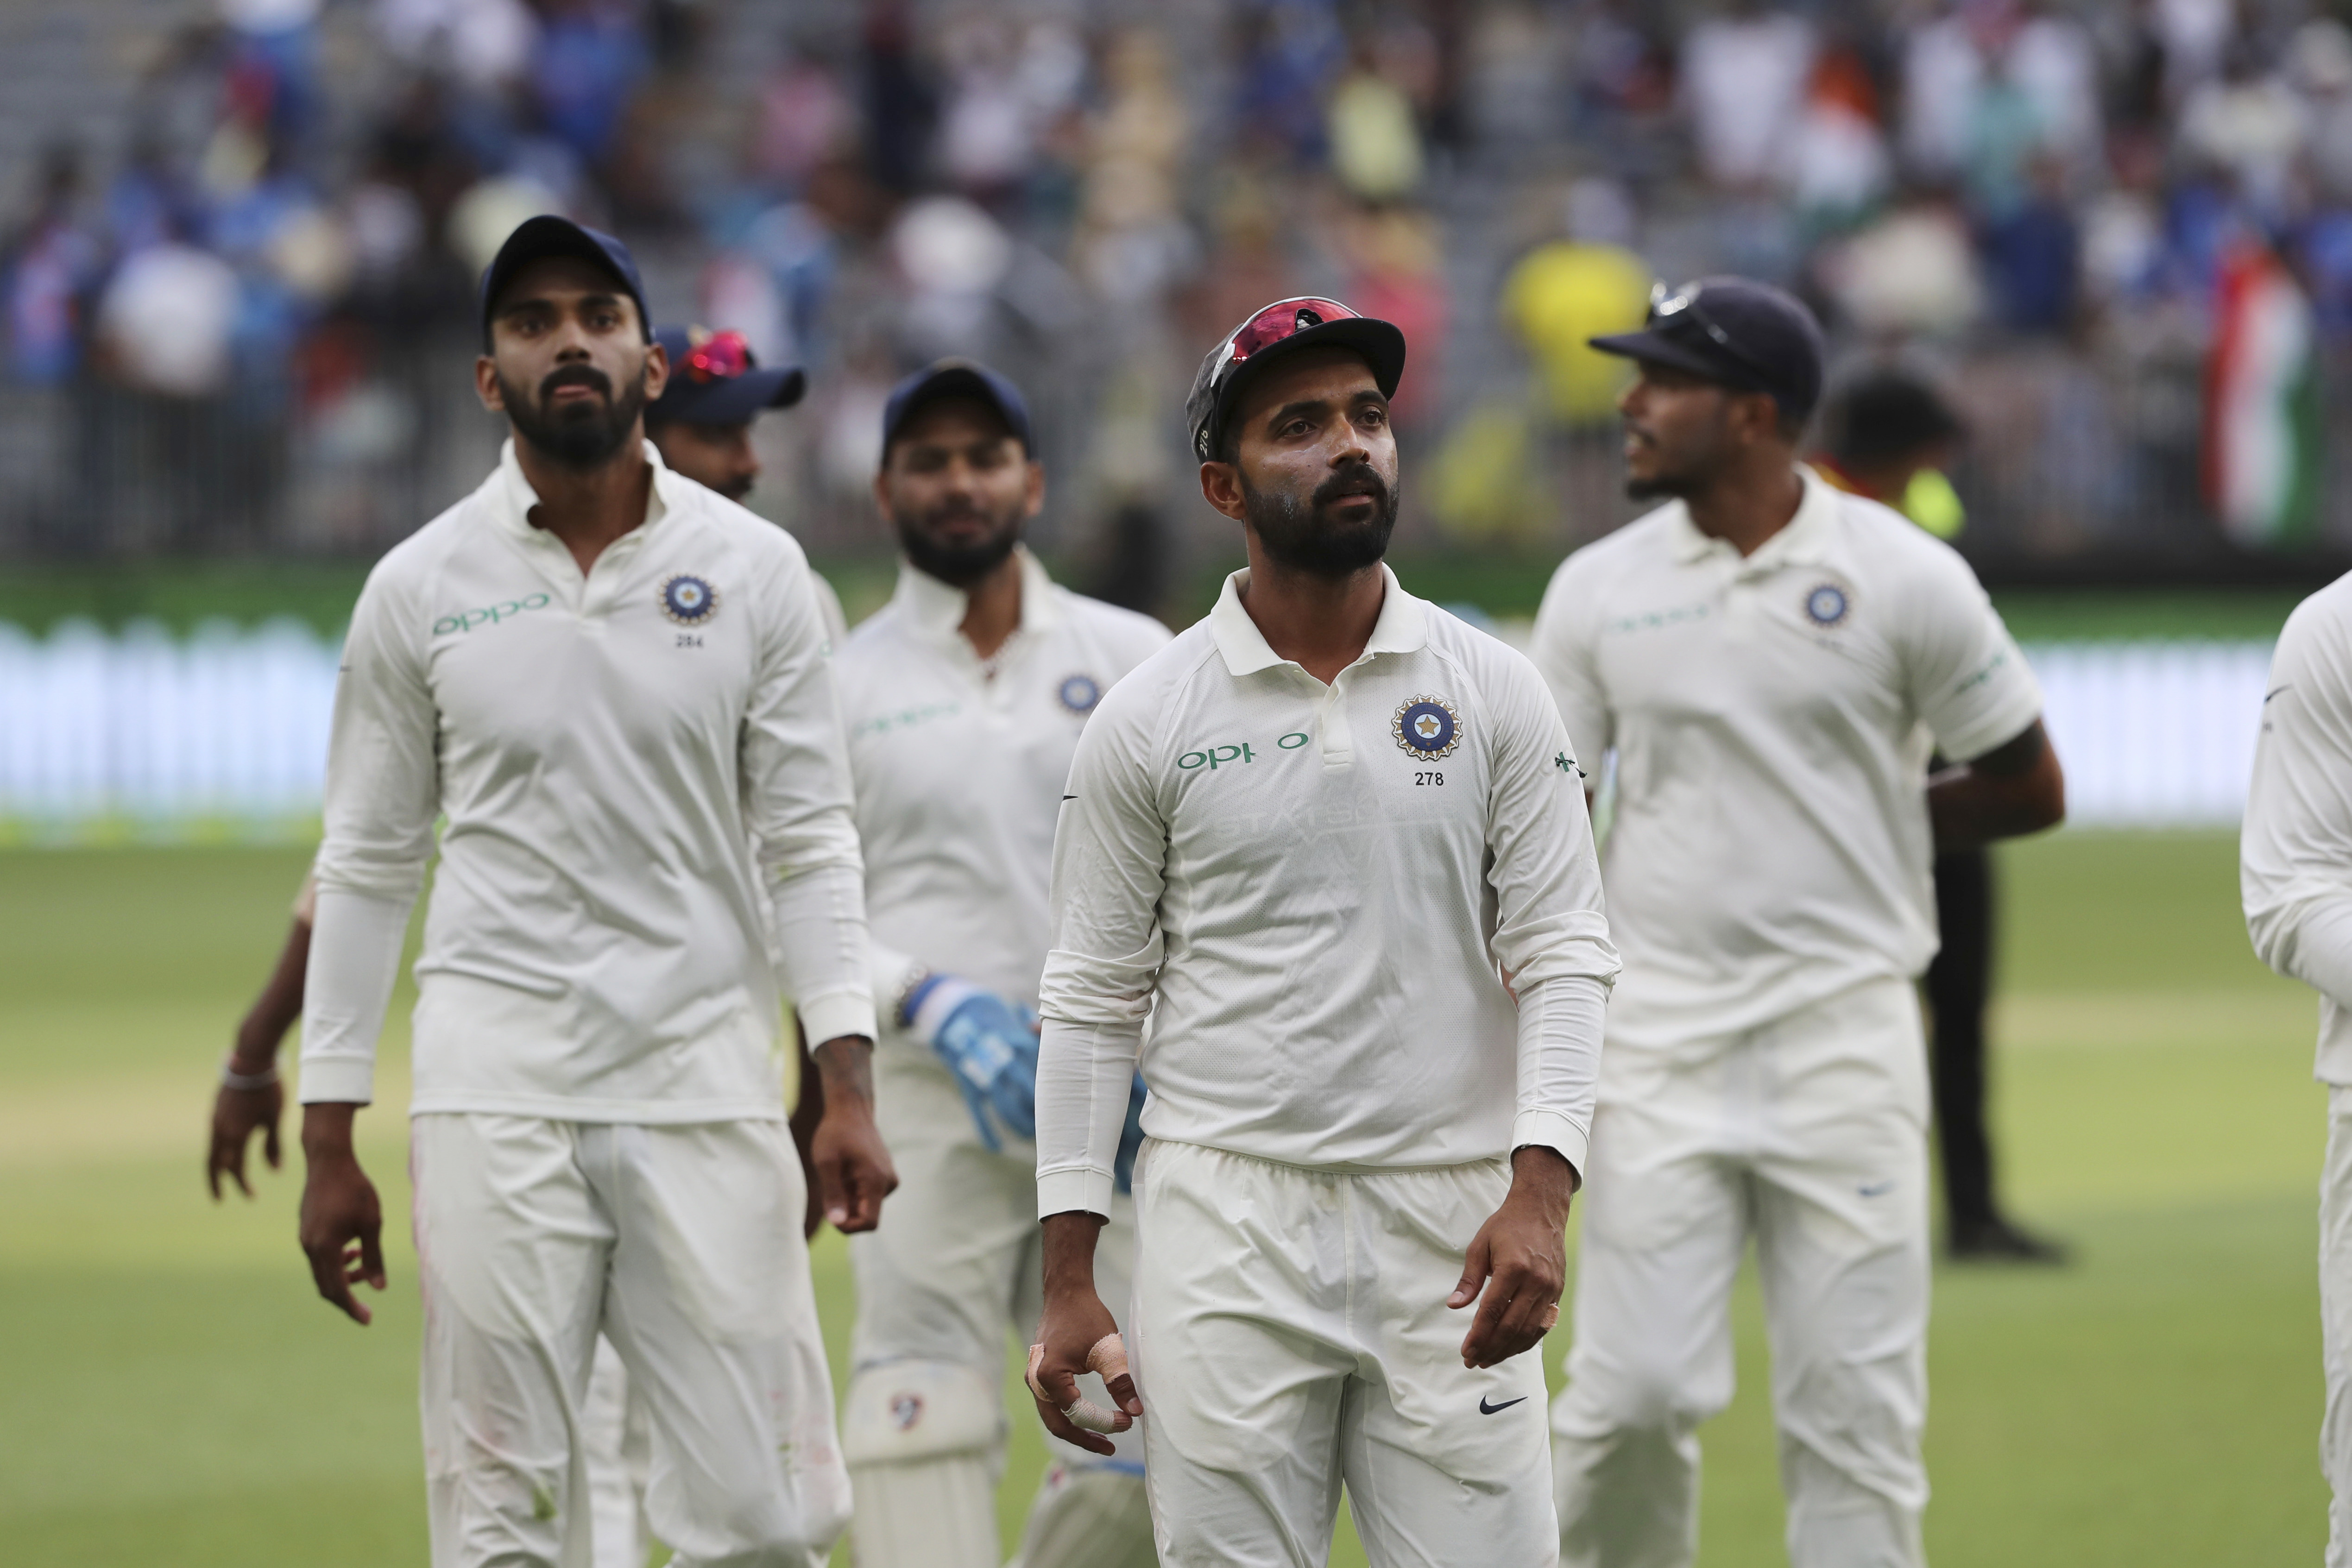 India's Ajinkya Rahane (second from right) leads his teammates off the ground at the conclusion of the third day's play in the second cricket Test between Australia and India in Perth on Sunday.